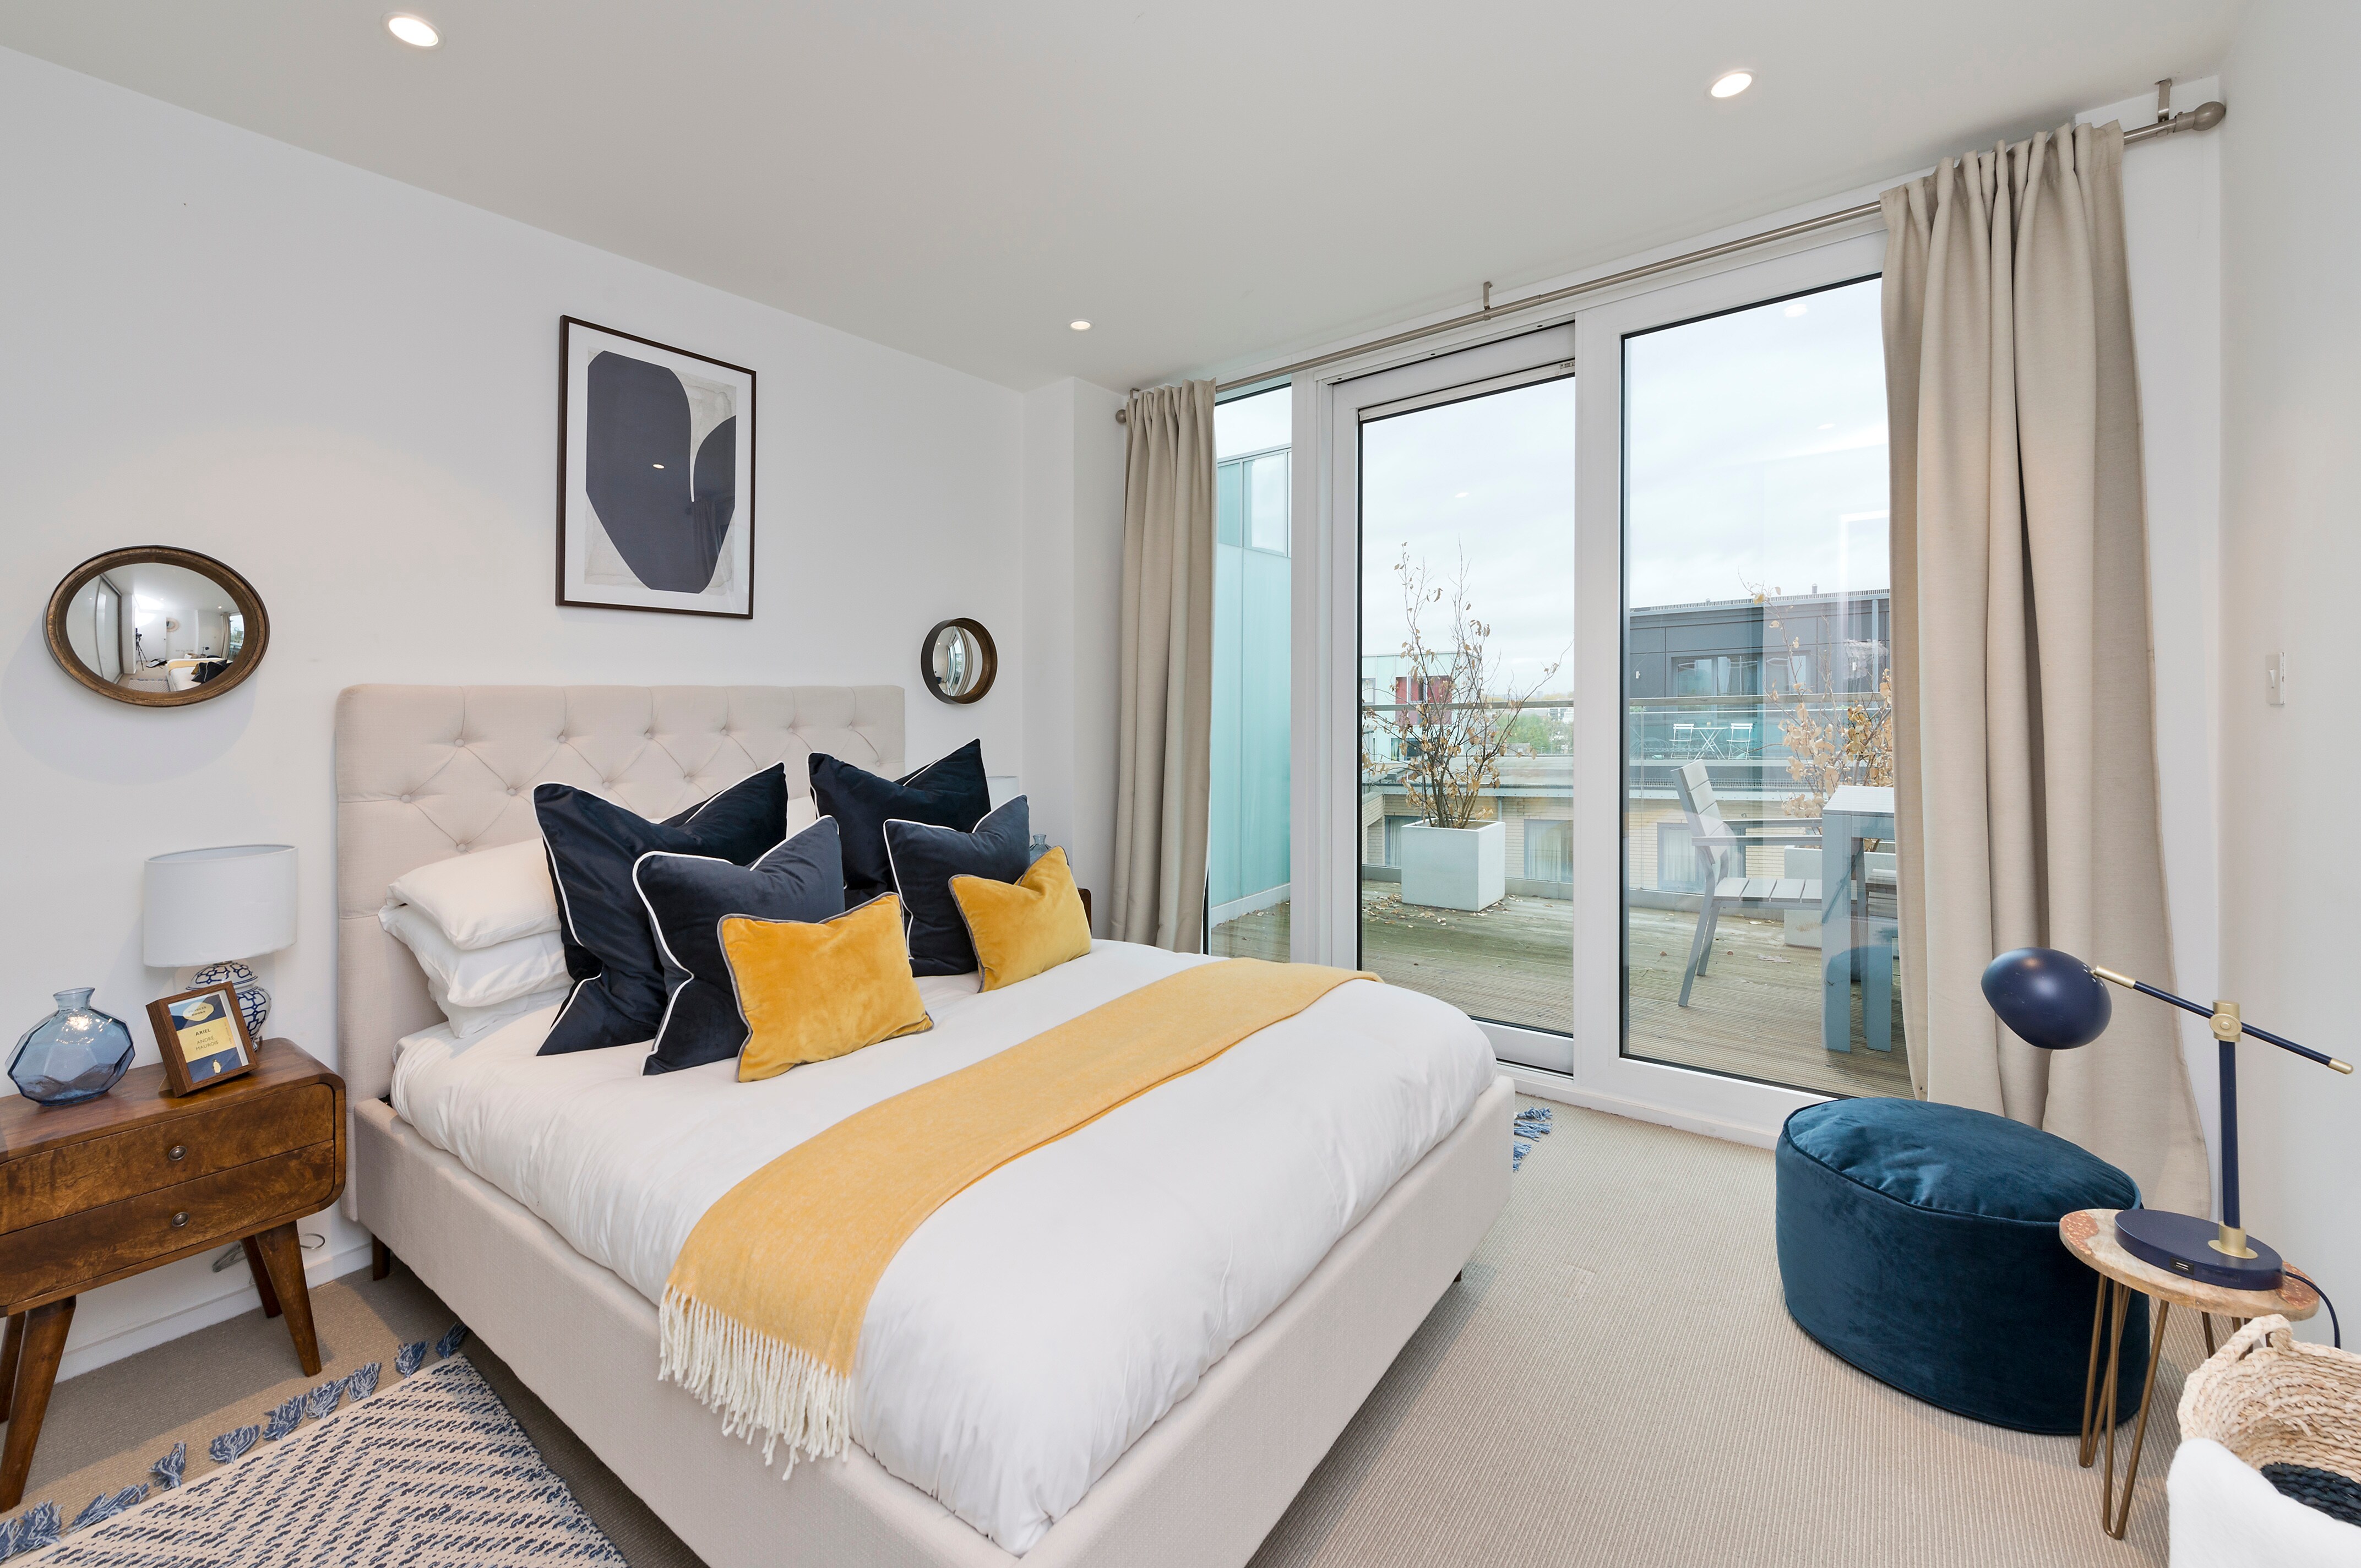 Property Image 1 - Luxury flat with private terrace in central Wandsworth by UnderTheDoormat